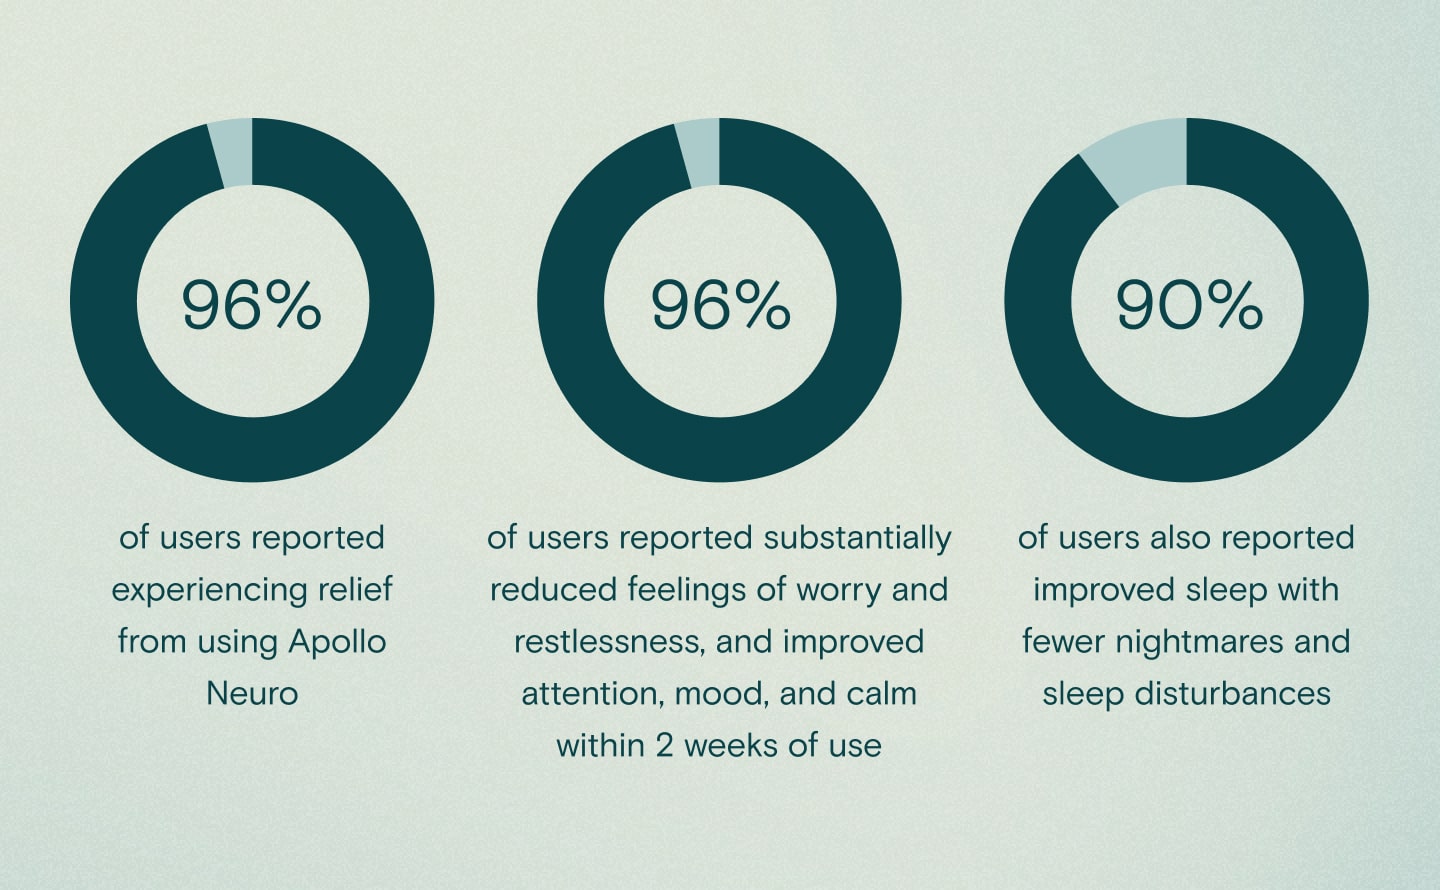 Out of 241 real-world Apollo users who voluntarily self-reported PTSD: 96% (232 users) reported experiencing relief from using Apollo Neuro. 96% of users reported substantially reduced feelings of worry and restlessness, and improved attention, mood, and calm within 2 weeks of use.  90% of users also reported improved sleep with fewer nightmares and sleep disturbances.